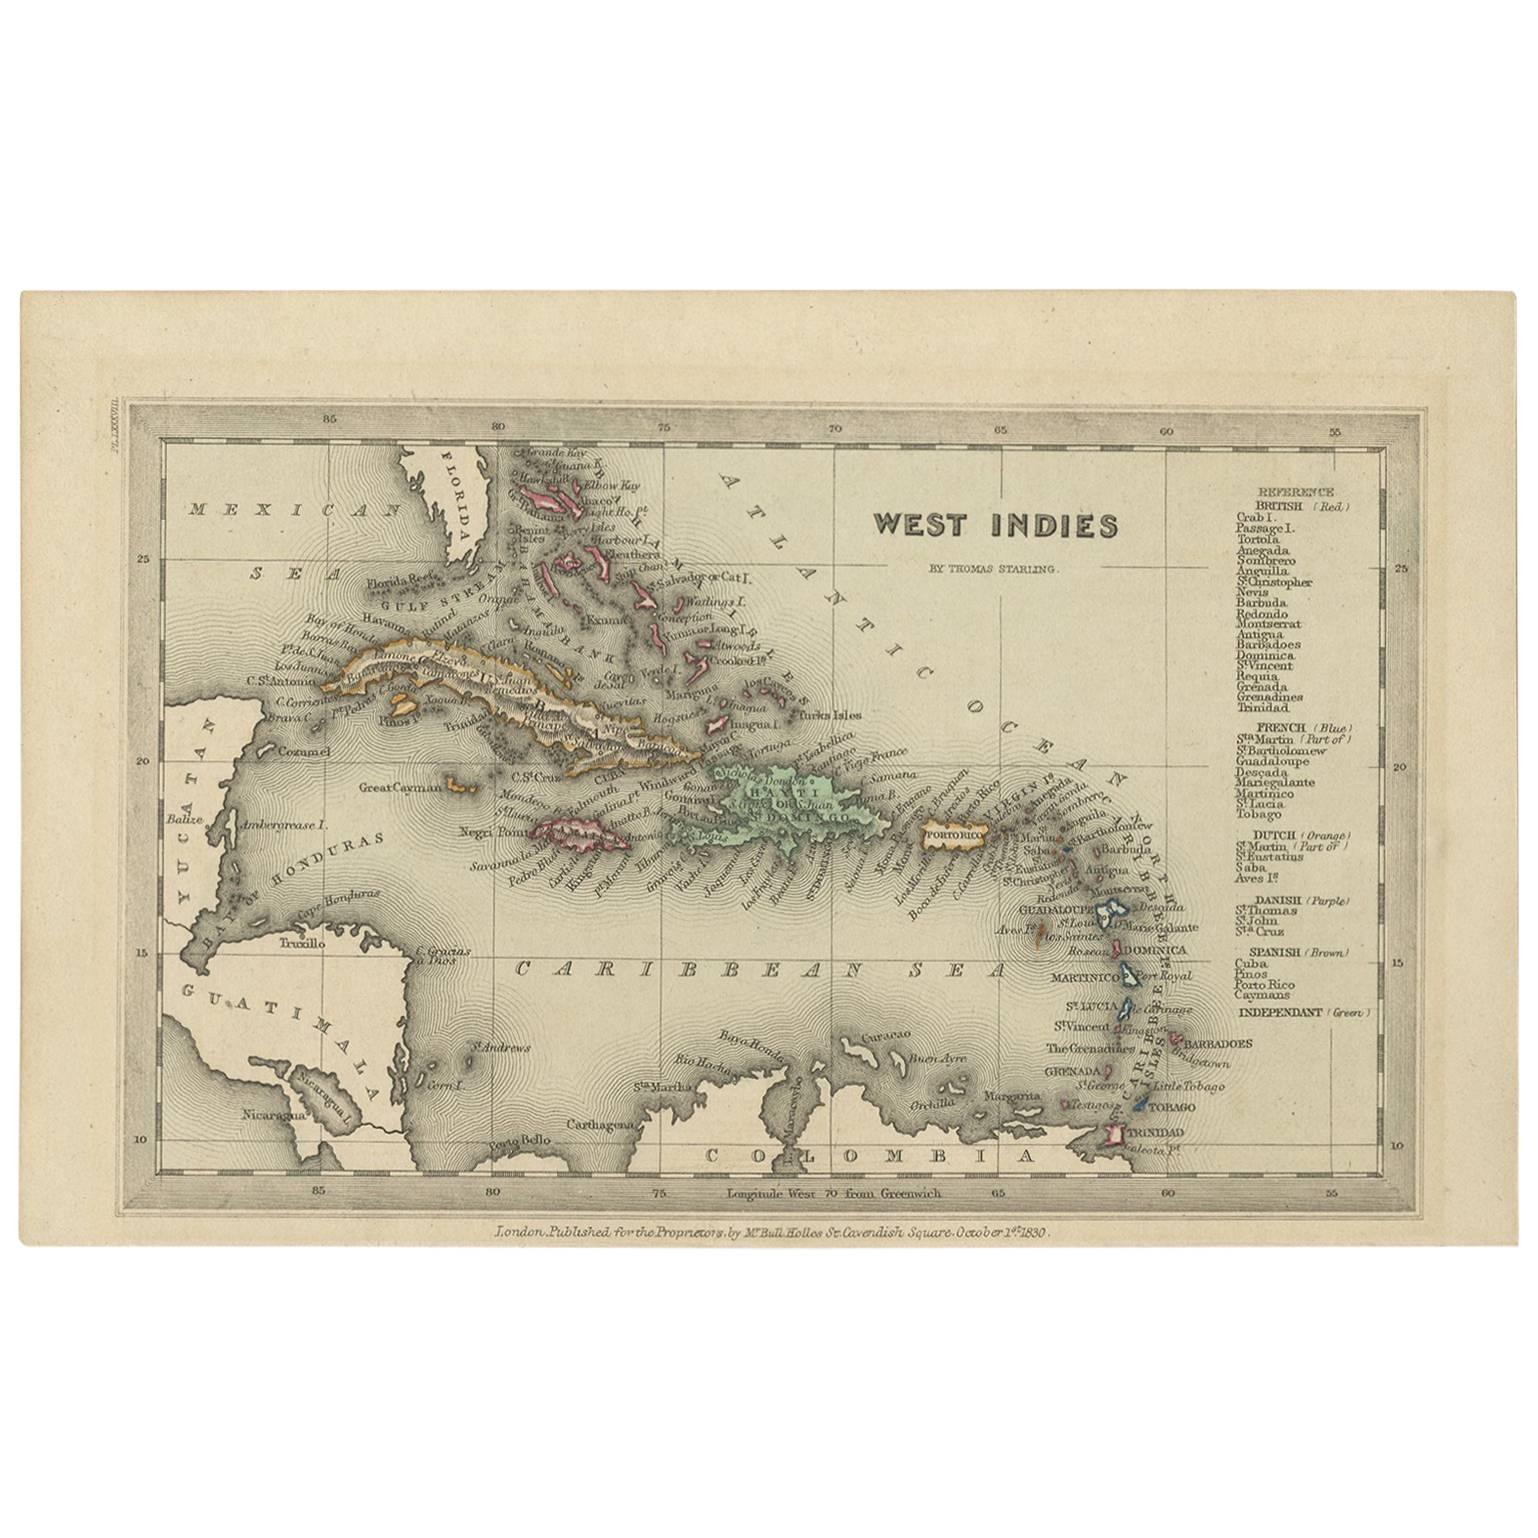 Antique Miniature Map of the West Indies by T. Starling, 1830